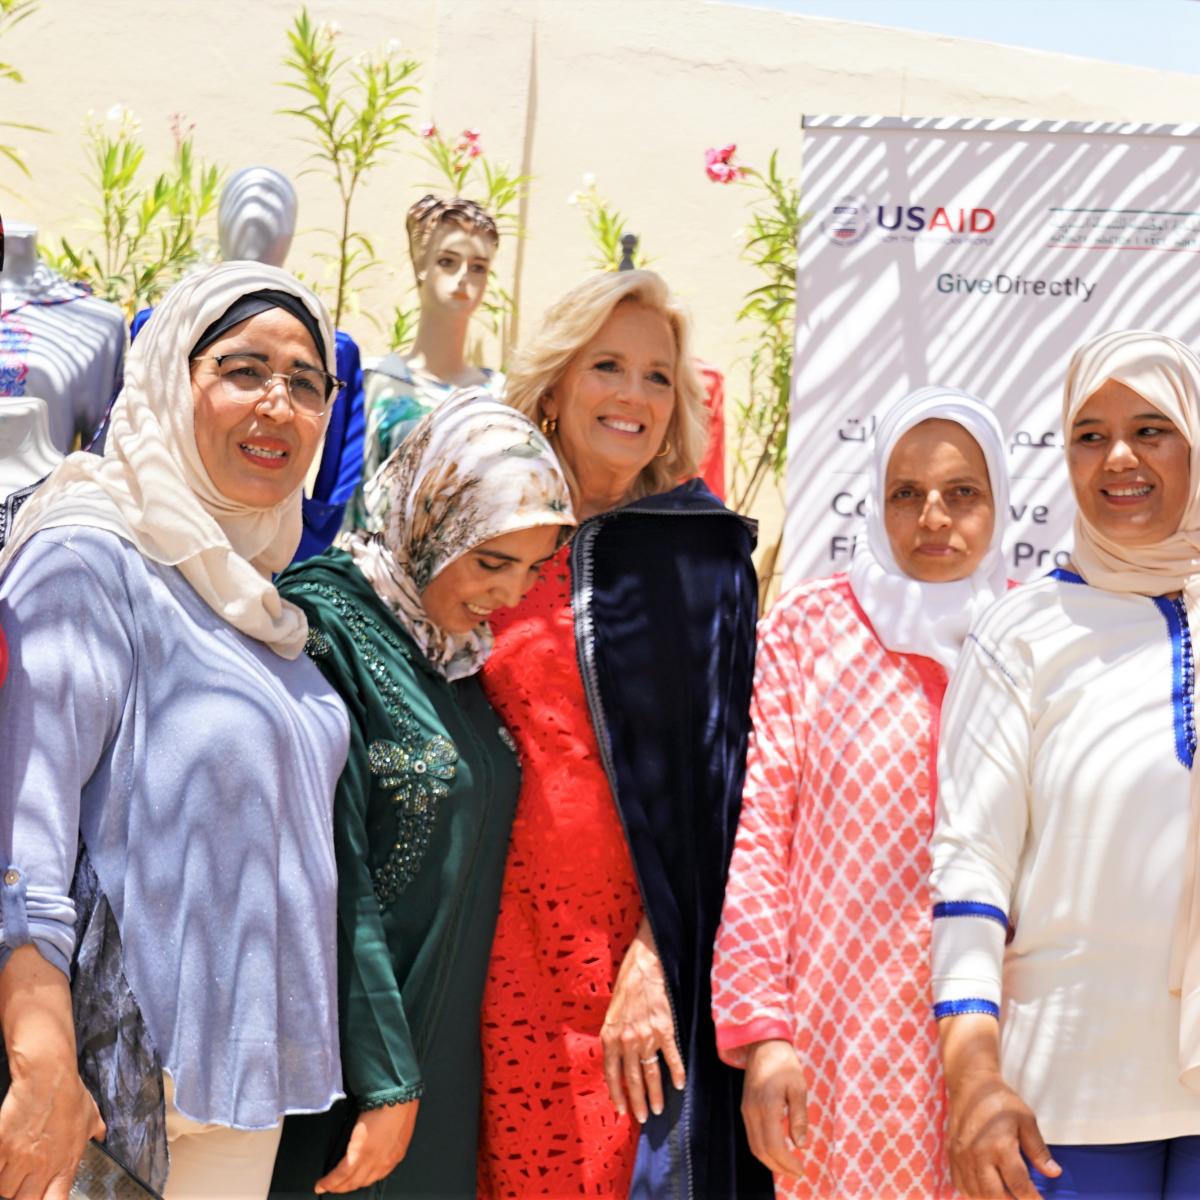 A group of women, mostly hijab-wearing, pose with First Lady Dr. Jill Biden, who is wearing a traditional Moroccan cape that is blue. A USAID project banner is displayed behind them, and it is sunny.